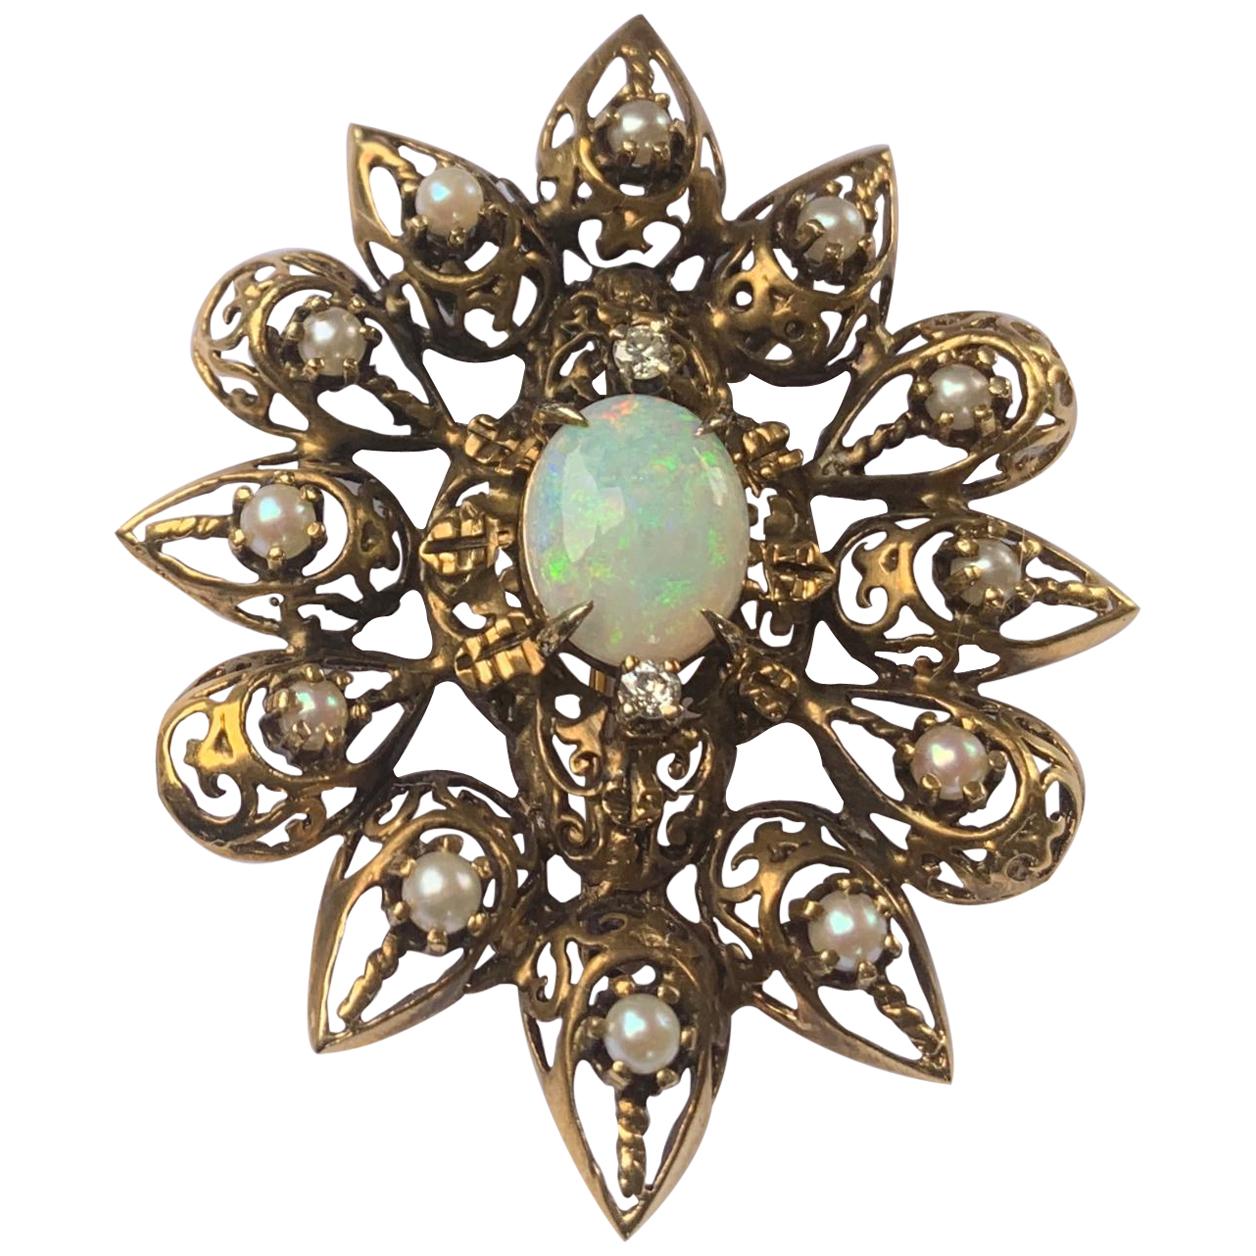 Fanciful Antique Victorian Filagree Opal, Diamond and Pearl Brooch Pendant